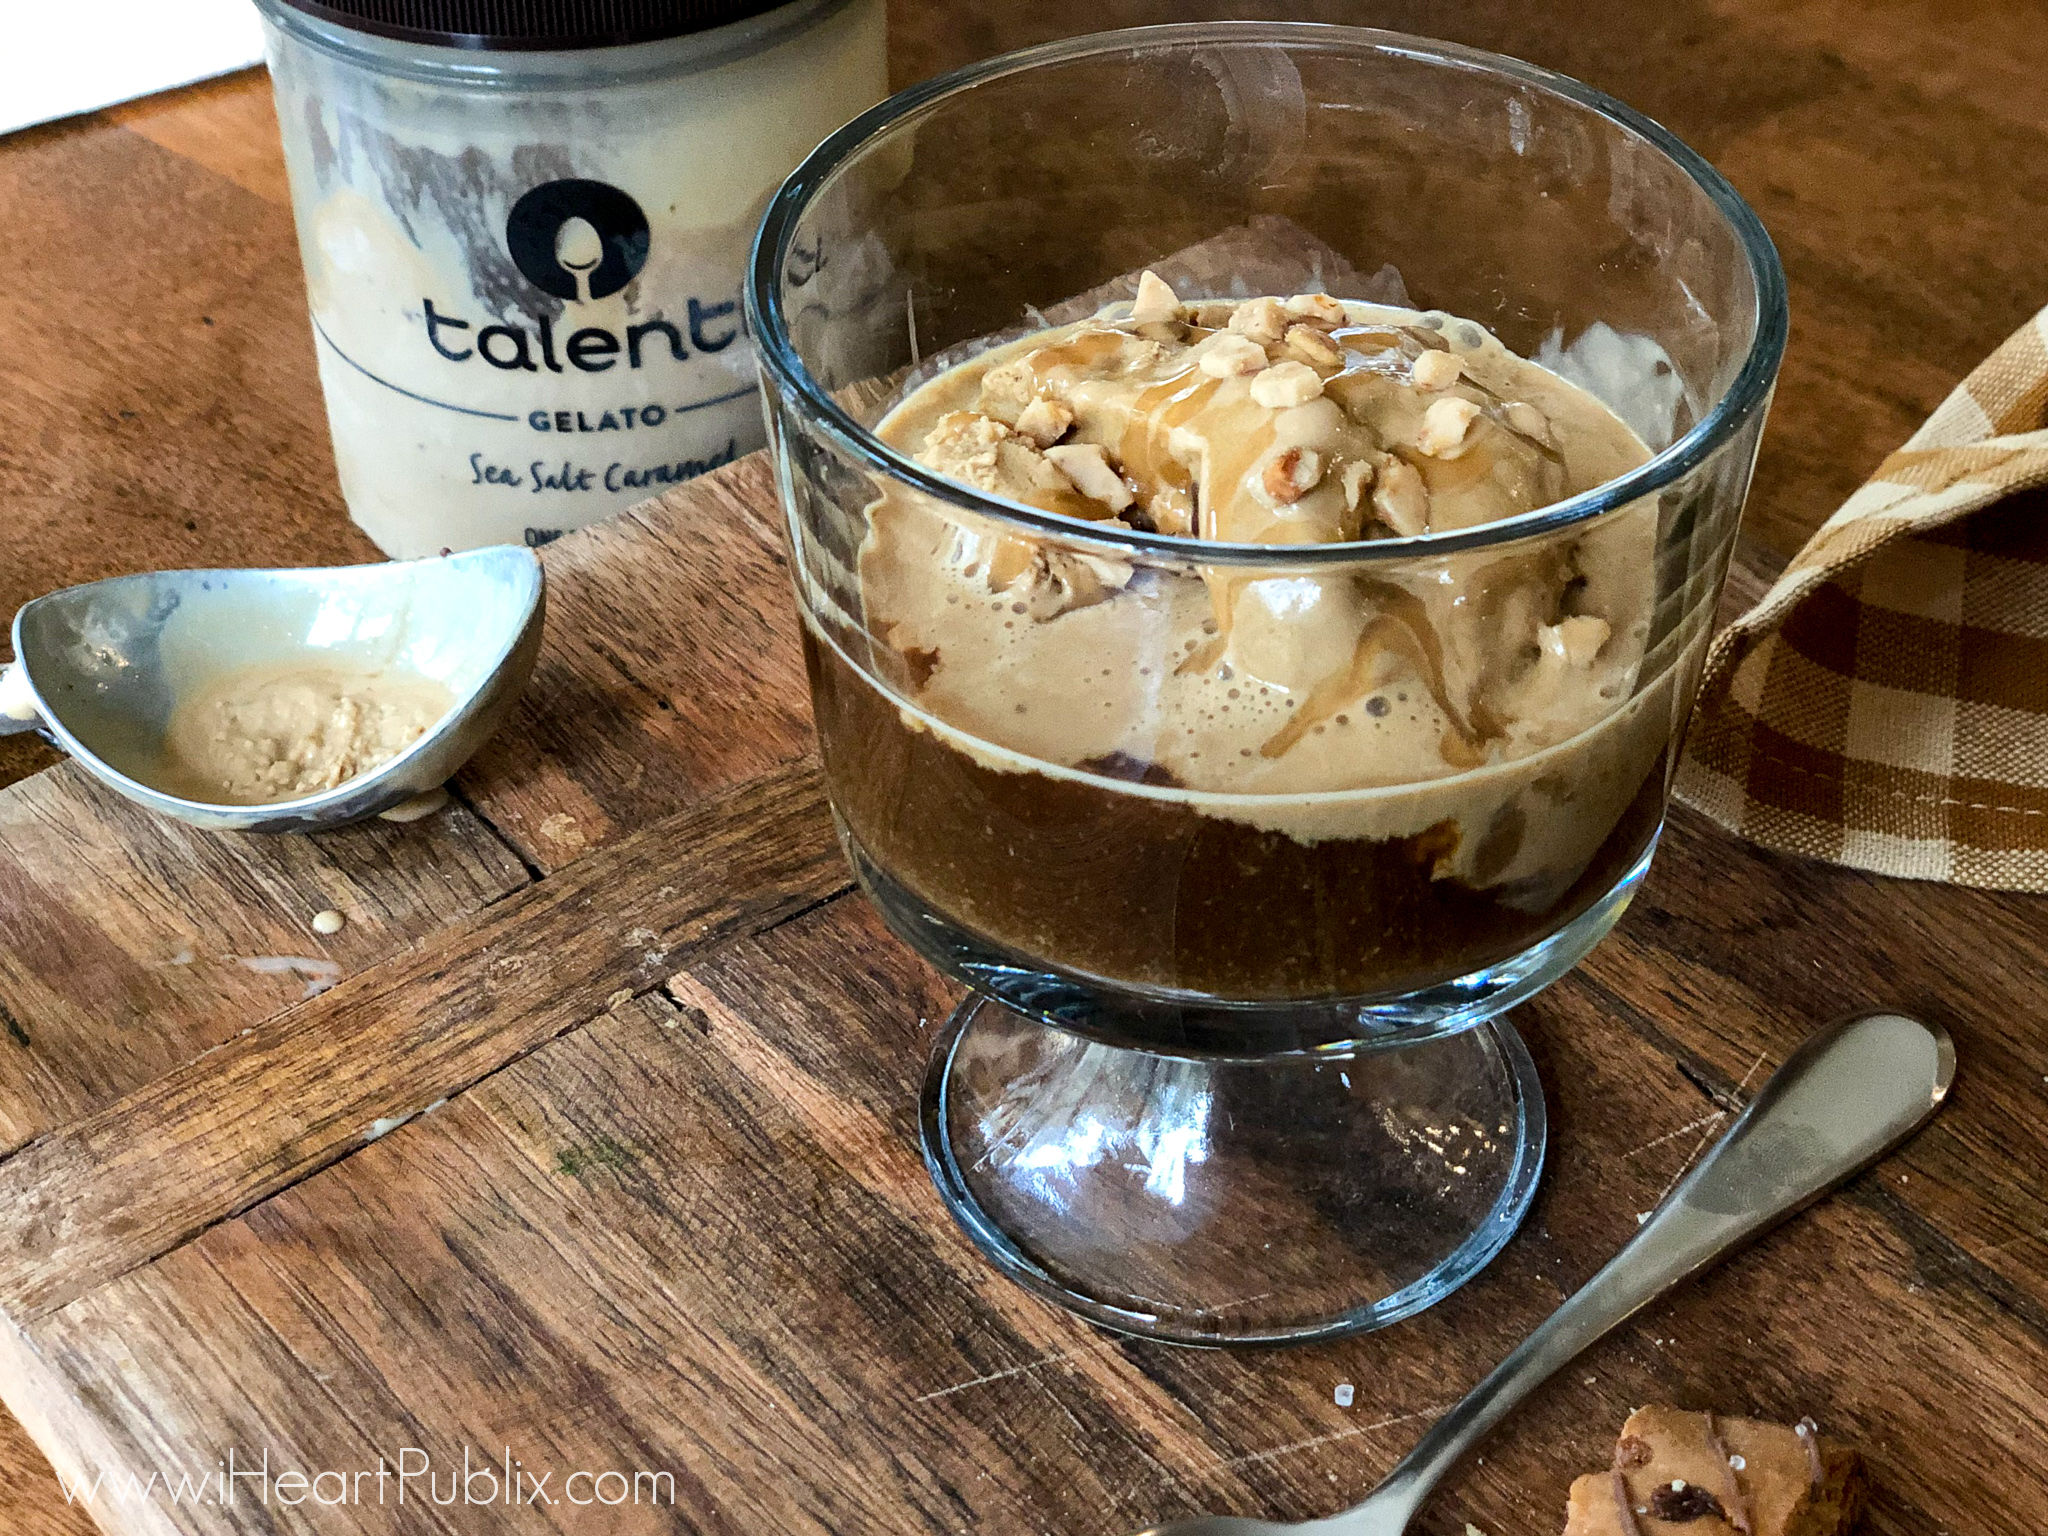 Try This Talenti Gelato Affogato & Grab Great Deal On Frozen Treats At Publix on I Heart Publix